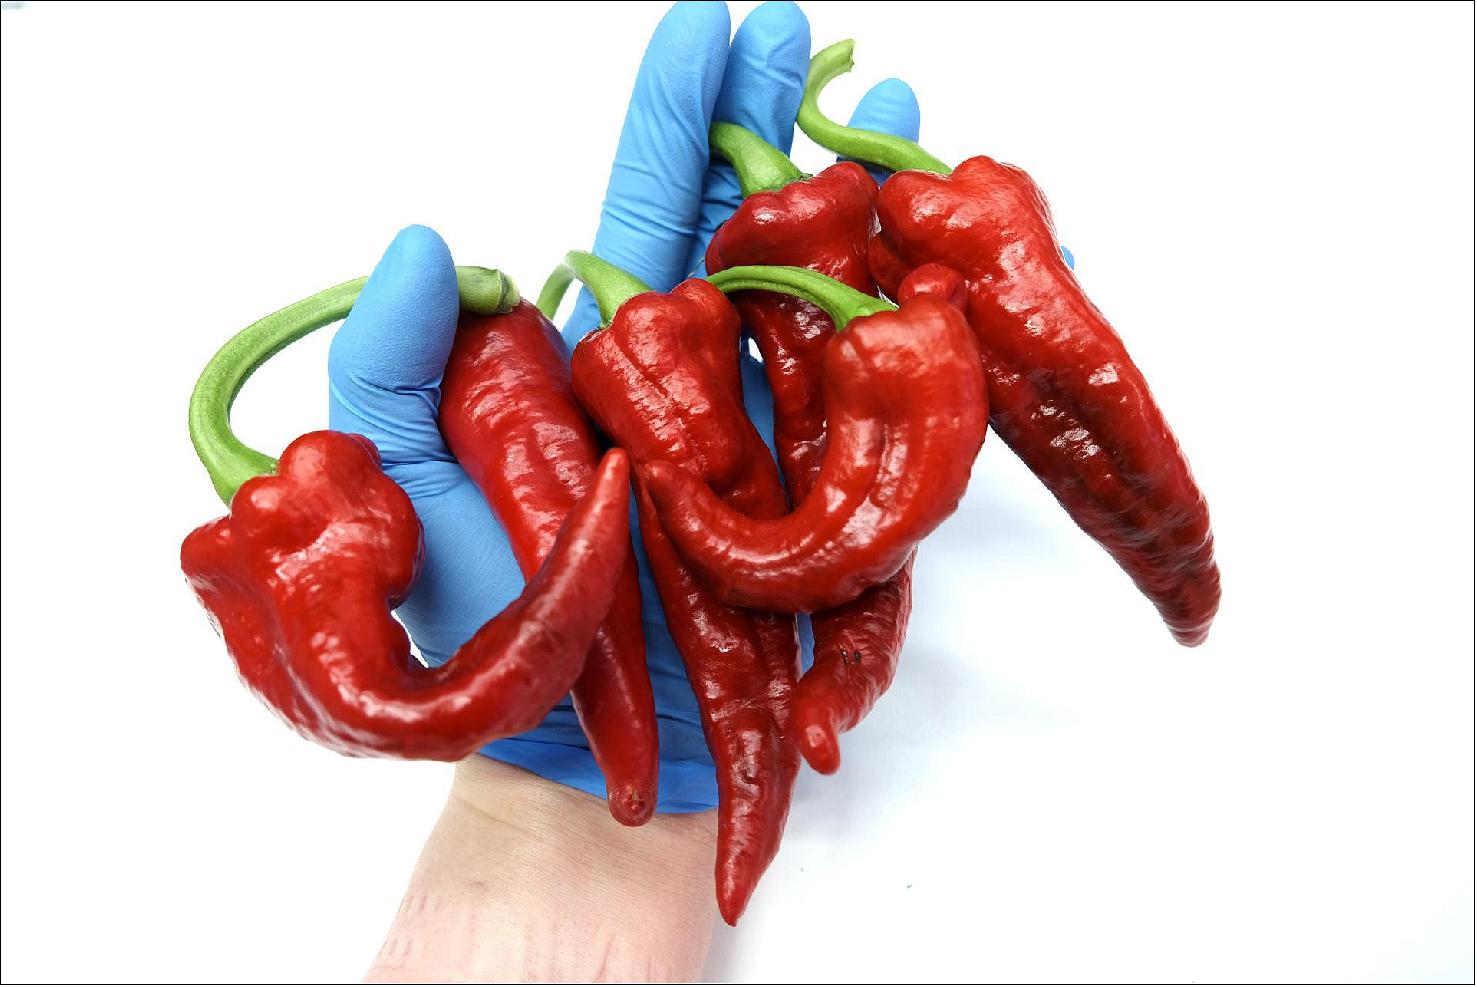 Figure 9: Chimayo pepper from the EDEN ISS greenhouse [image credit: DLR (CC BY-NC-ND 3.0)]